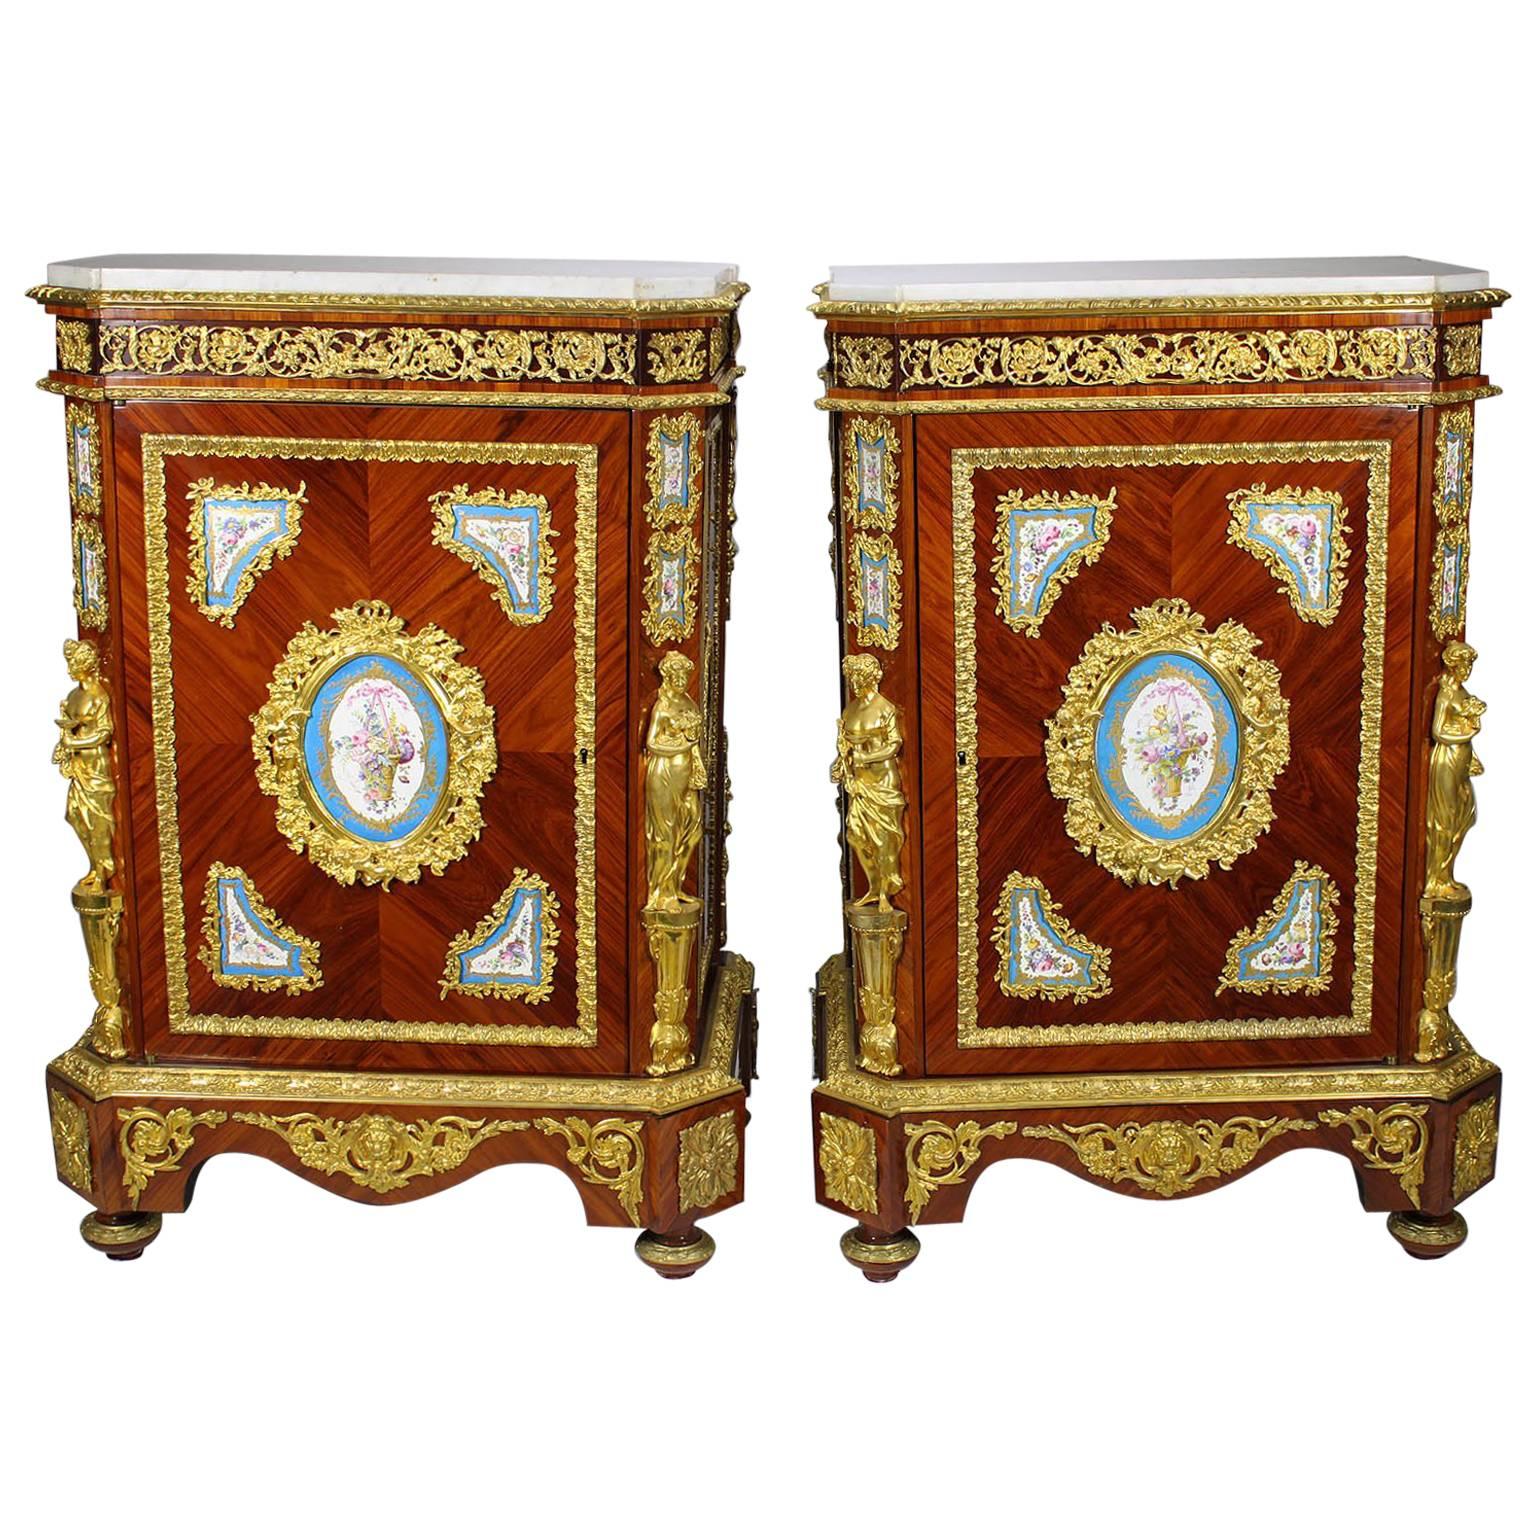 Pair of French Napoleon III Figural Ormolu and Porcelain Mounted Side-Cabinets